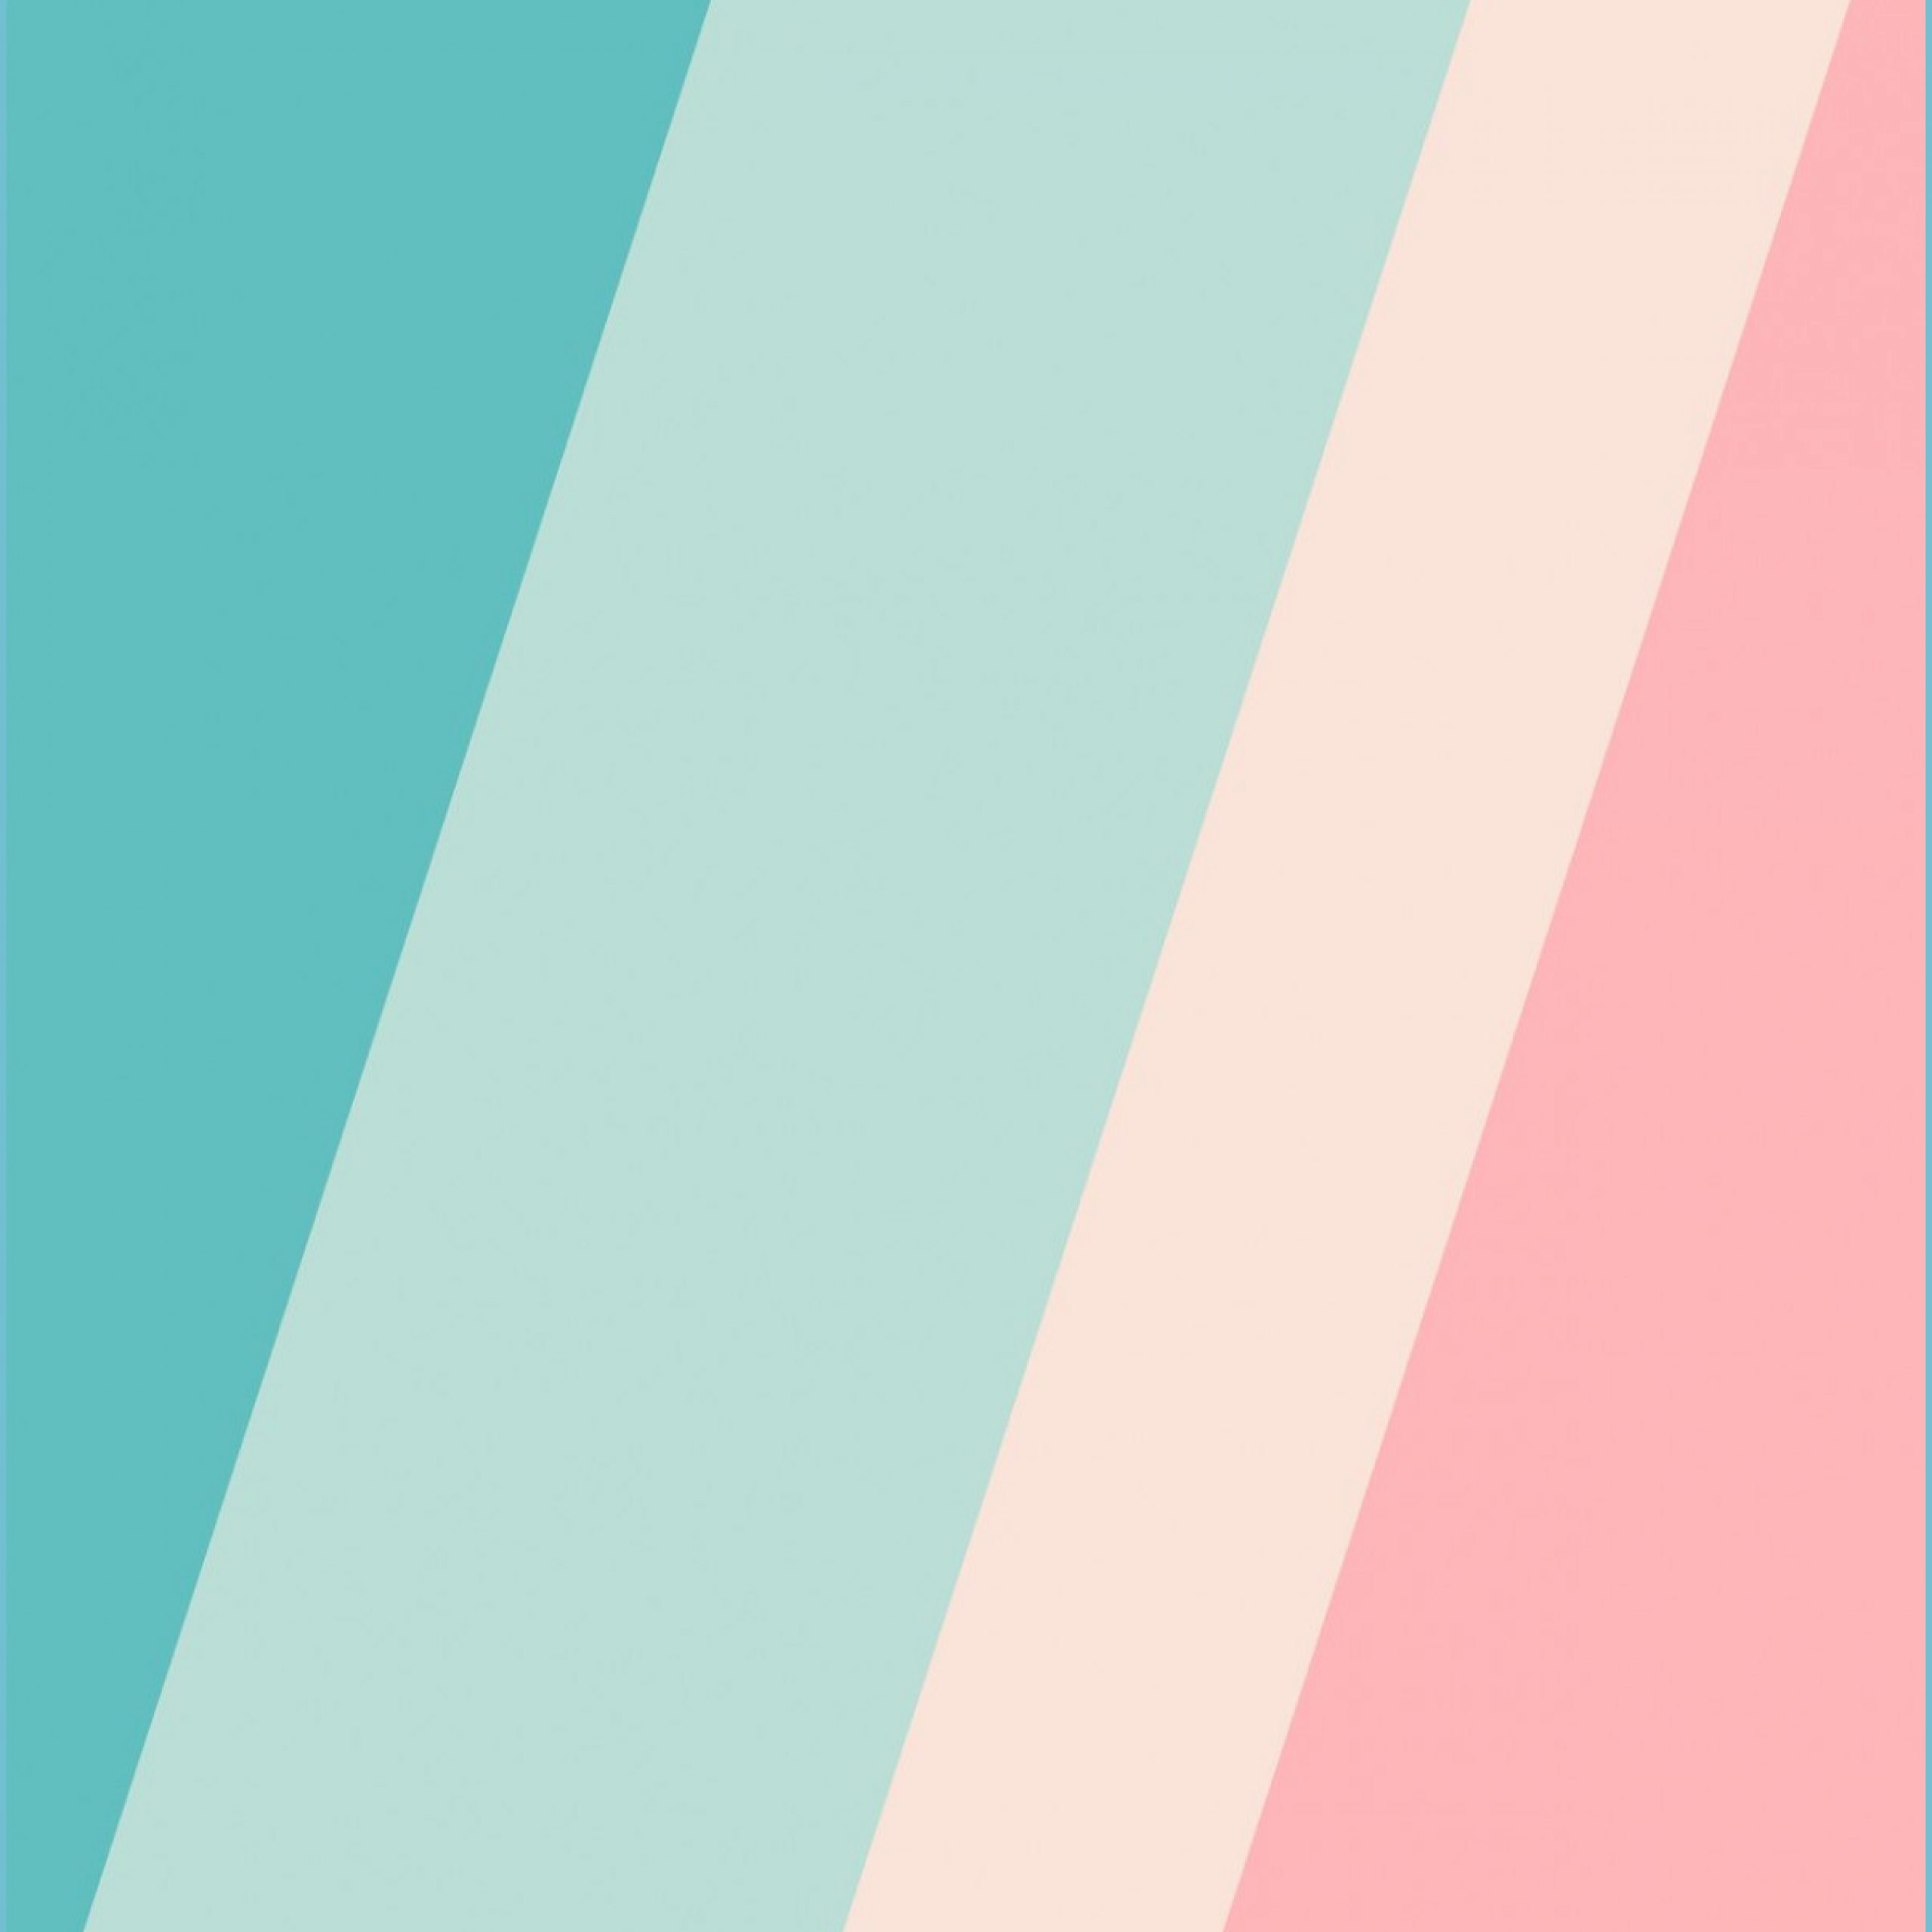 Pink And Teal Striped Textile IPhone X Wallpaper Free Download And Pink Wallpaper